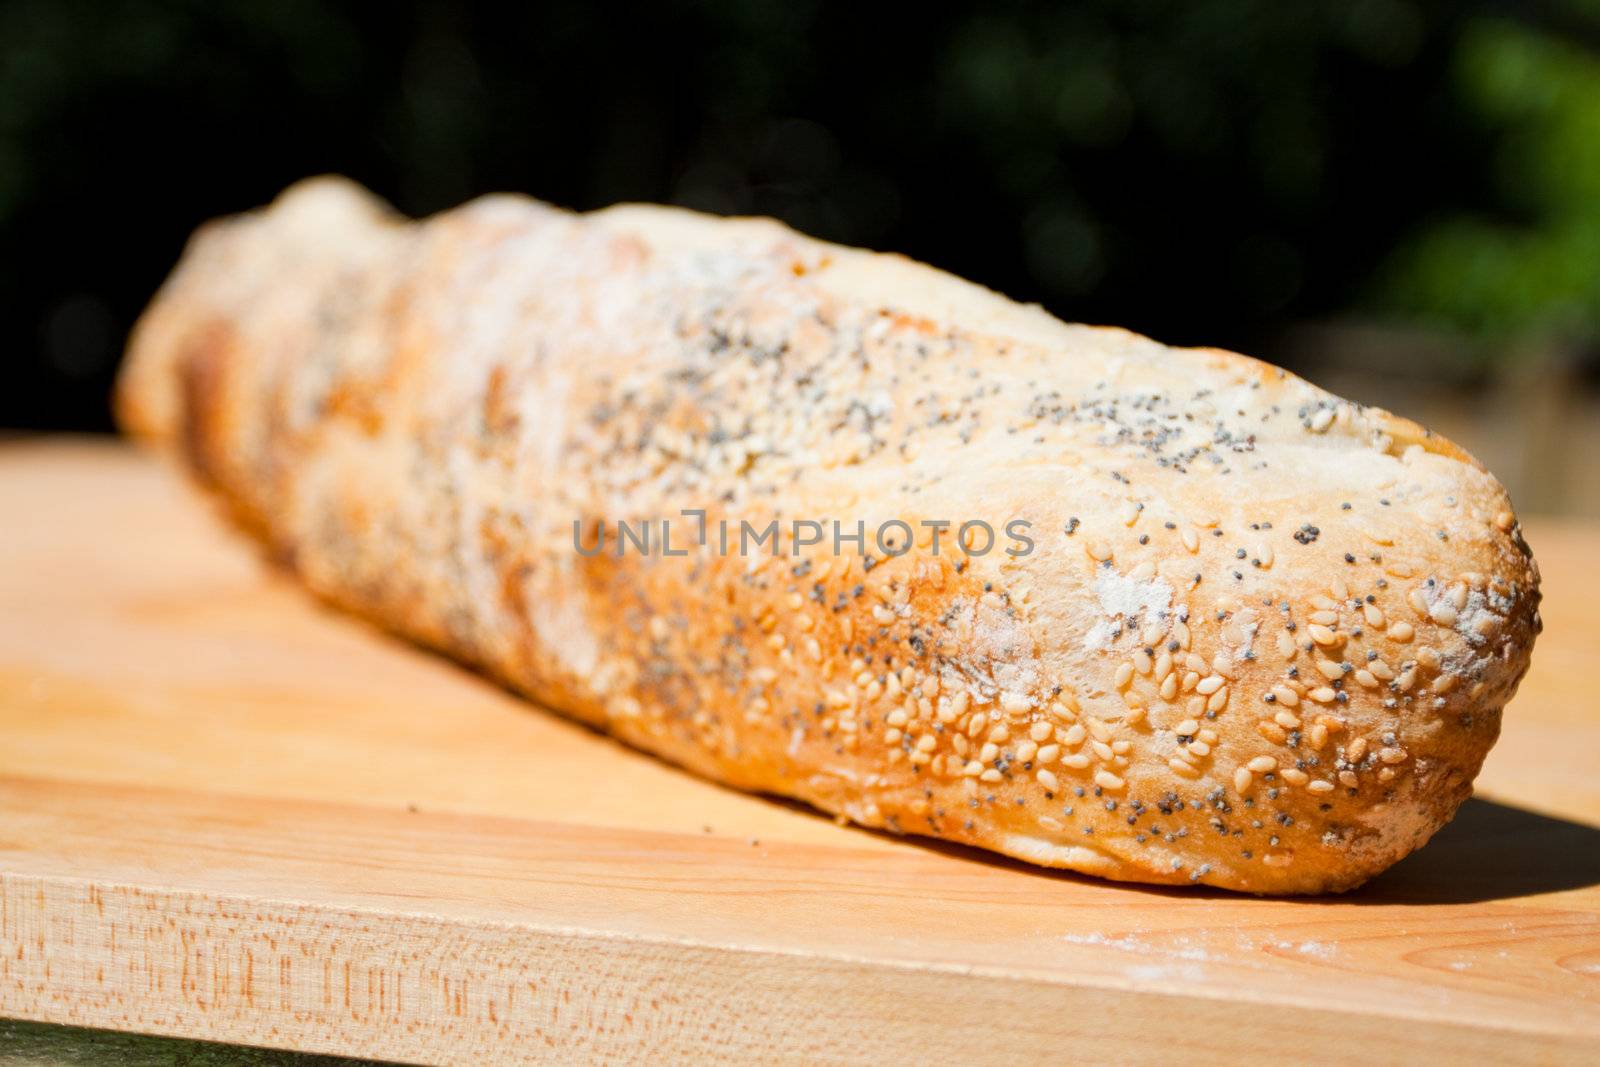 Fine artisan bread that is homemade by an incredible baker.